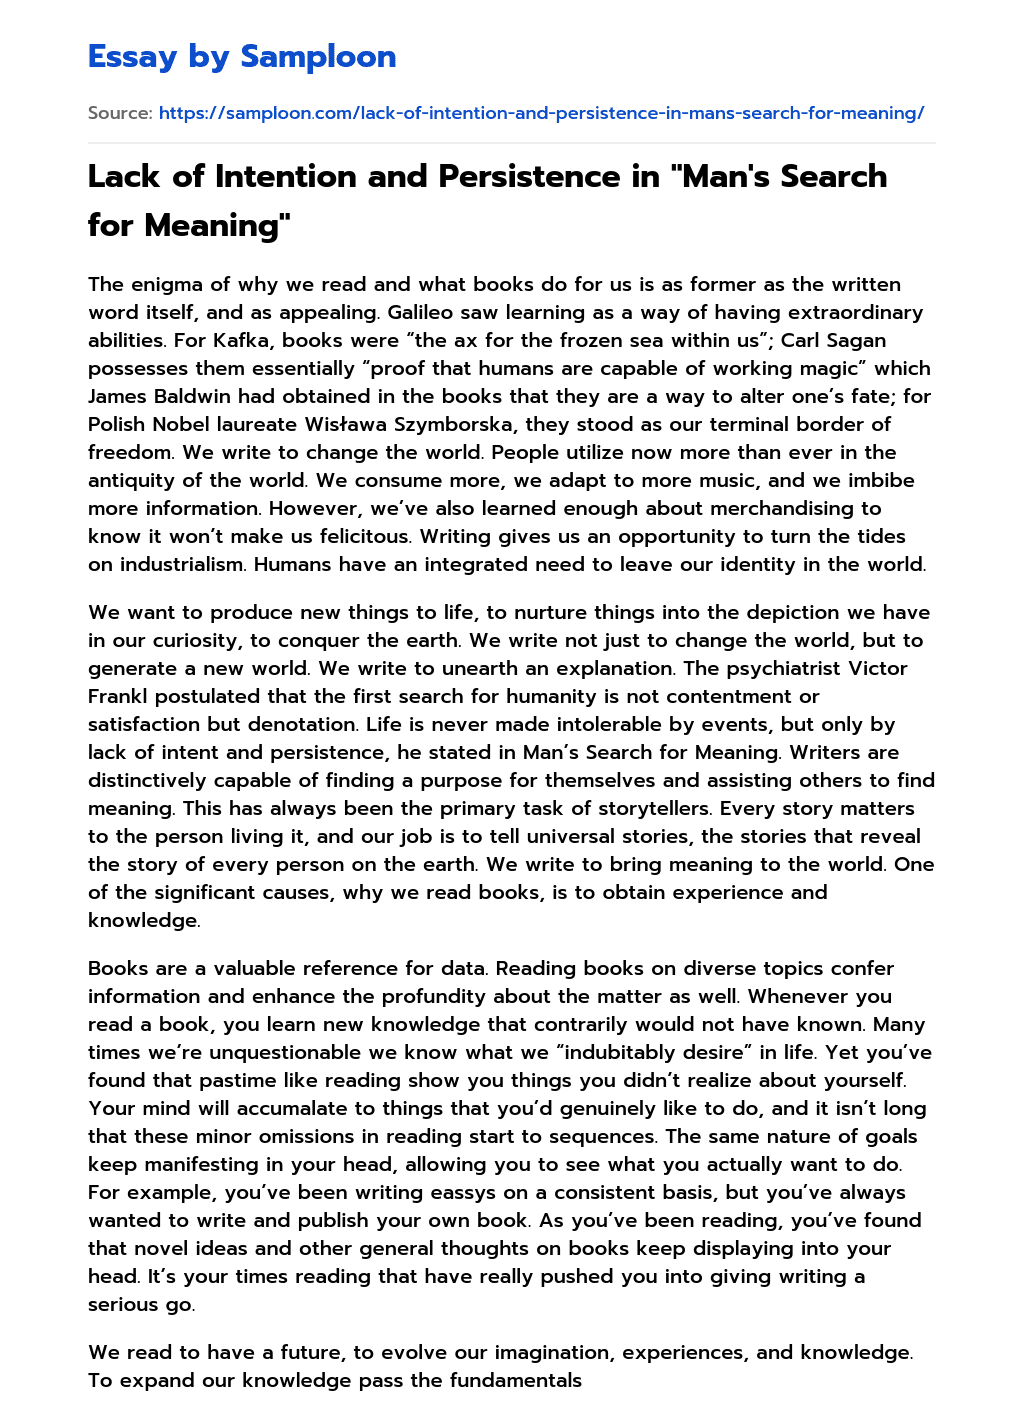 Lack of Intention and Persistence in “Man’s Search for Meaning” essay